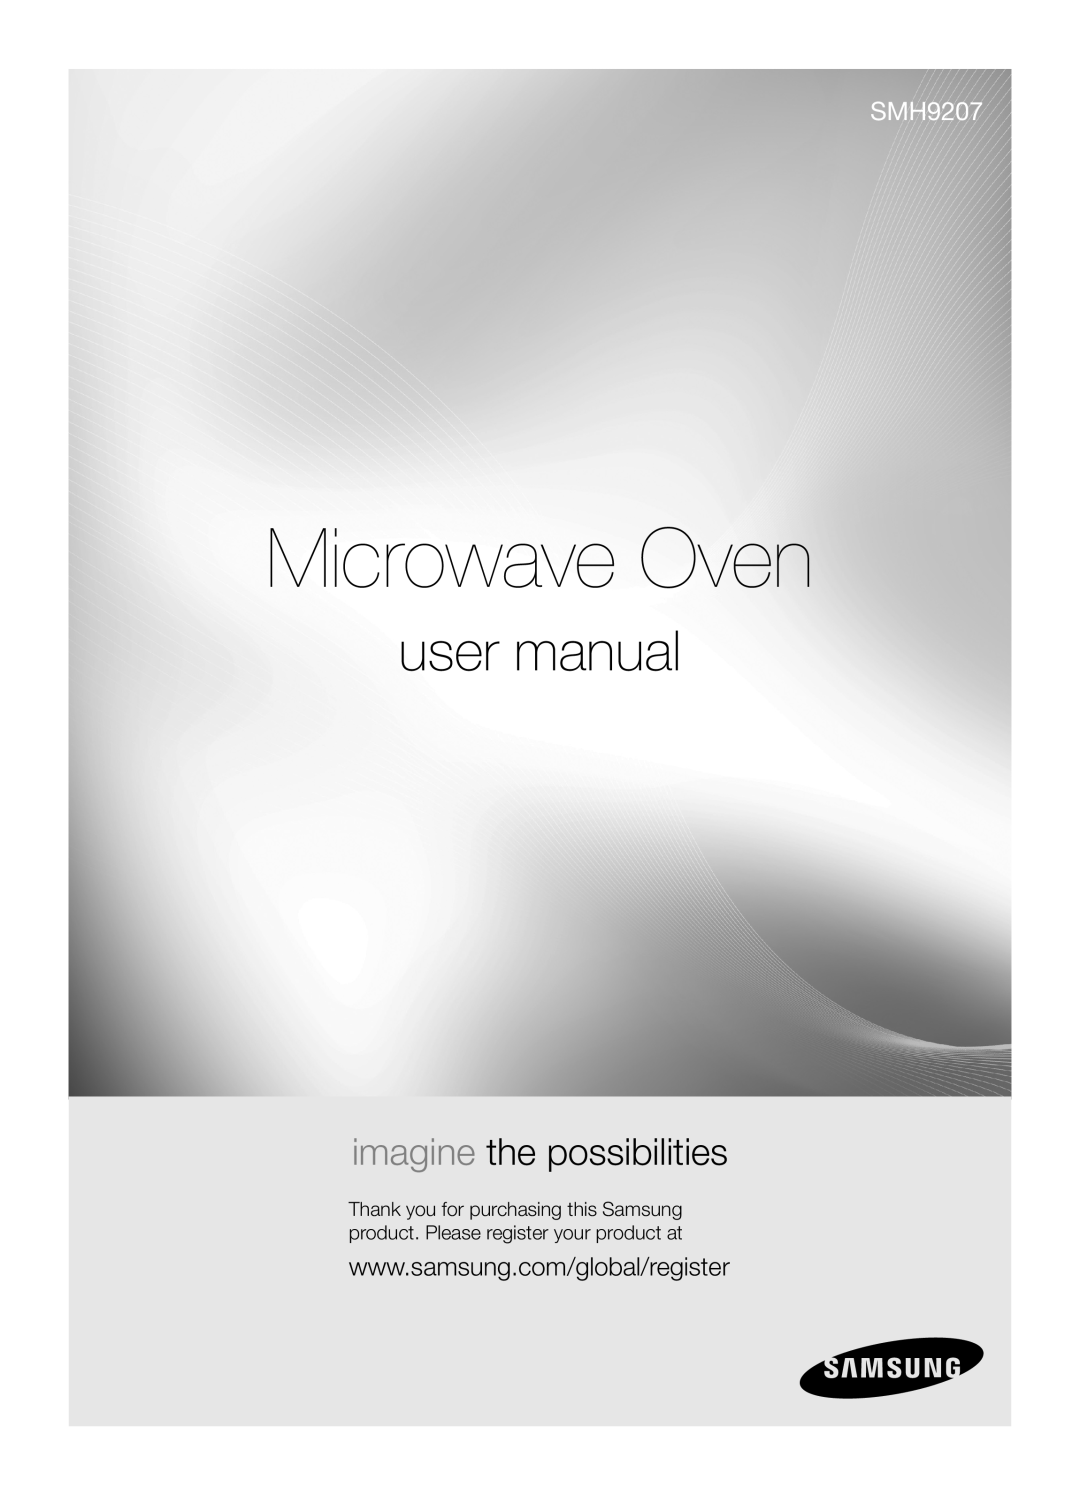 Samsung SMH9207 user manual Microwave Oven, imagine the possibilities 